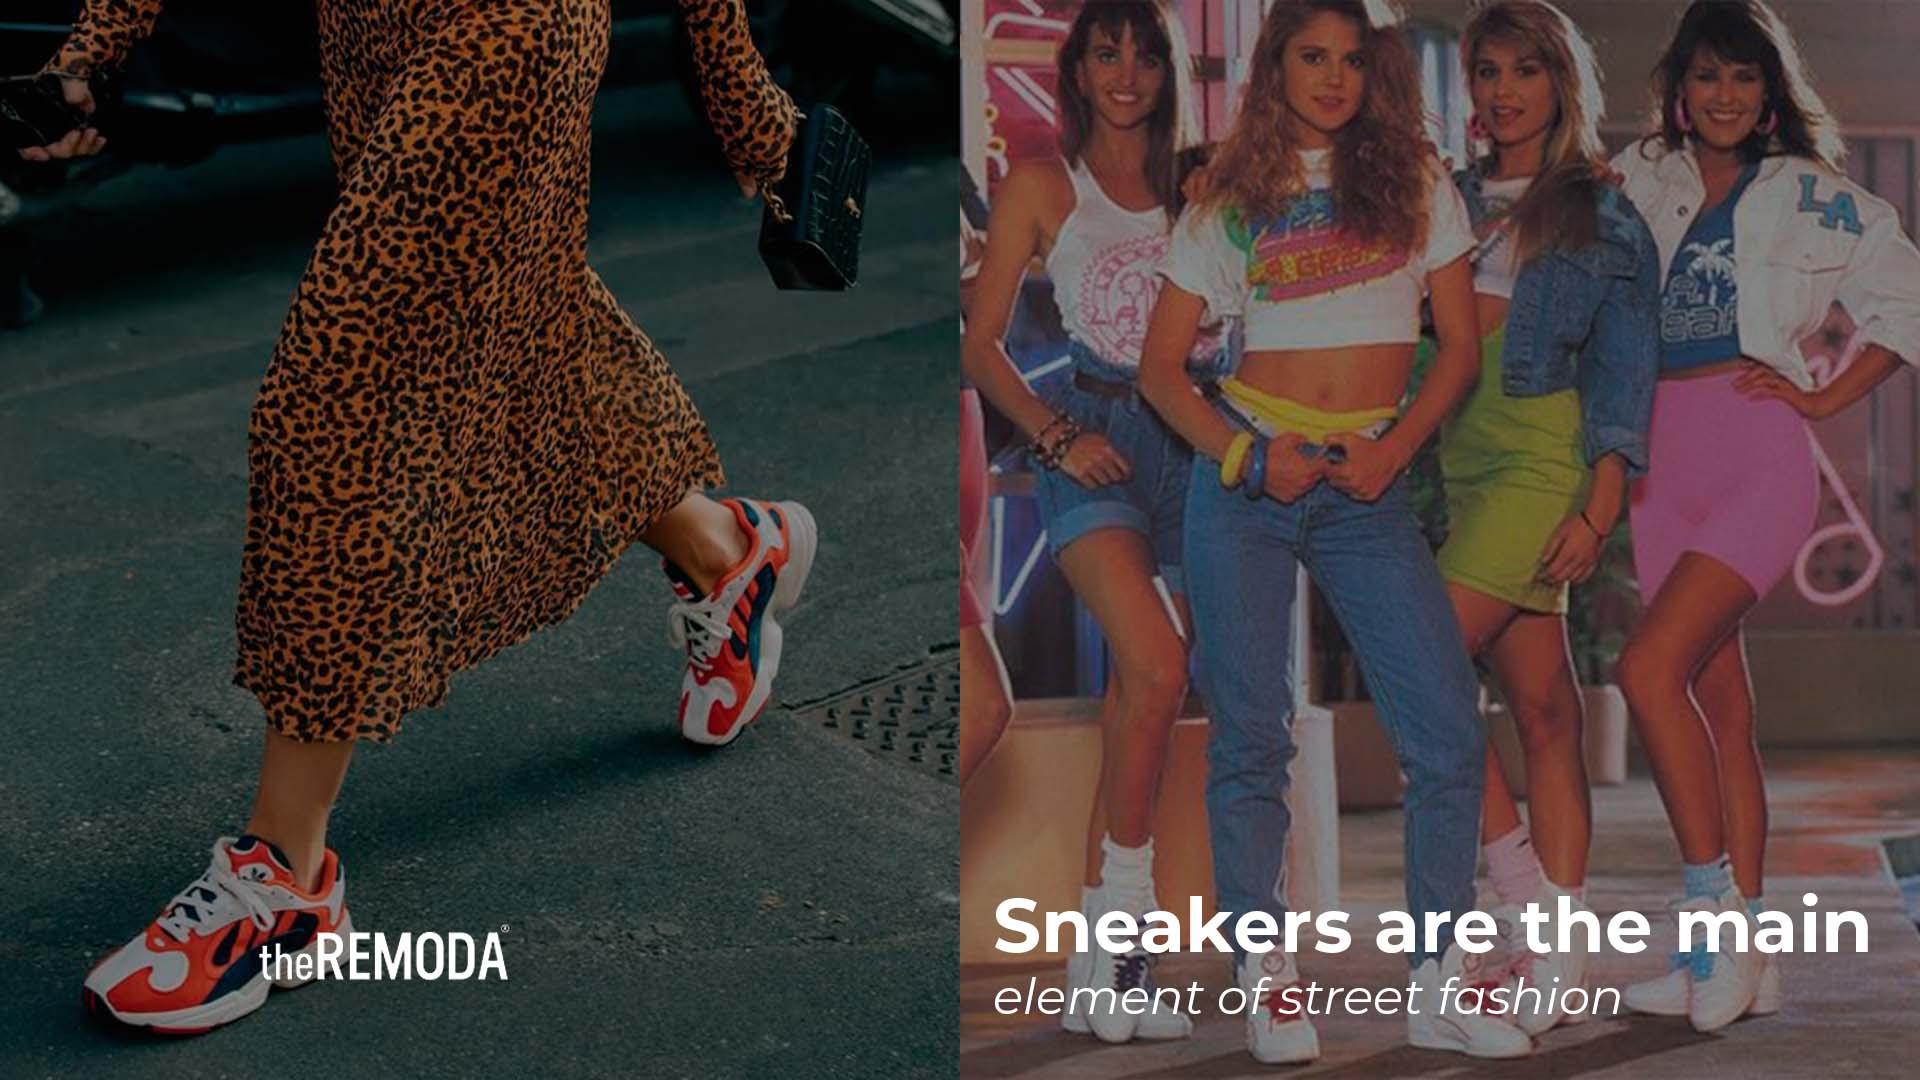 Sneakers are the main element of street fashion - theREMODA